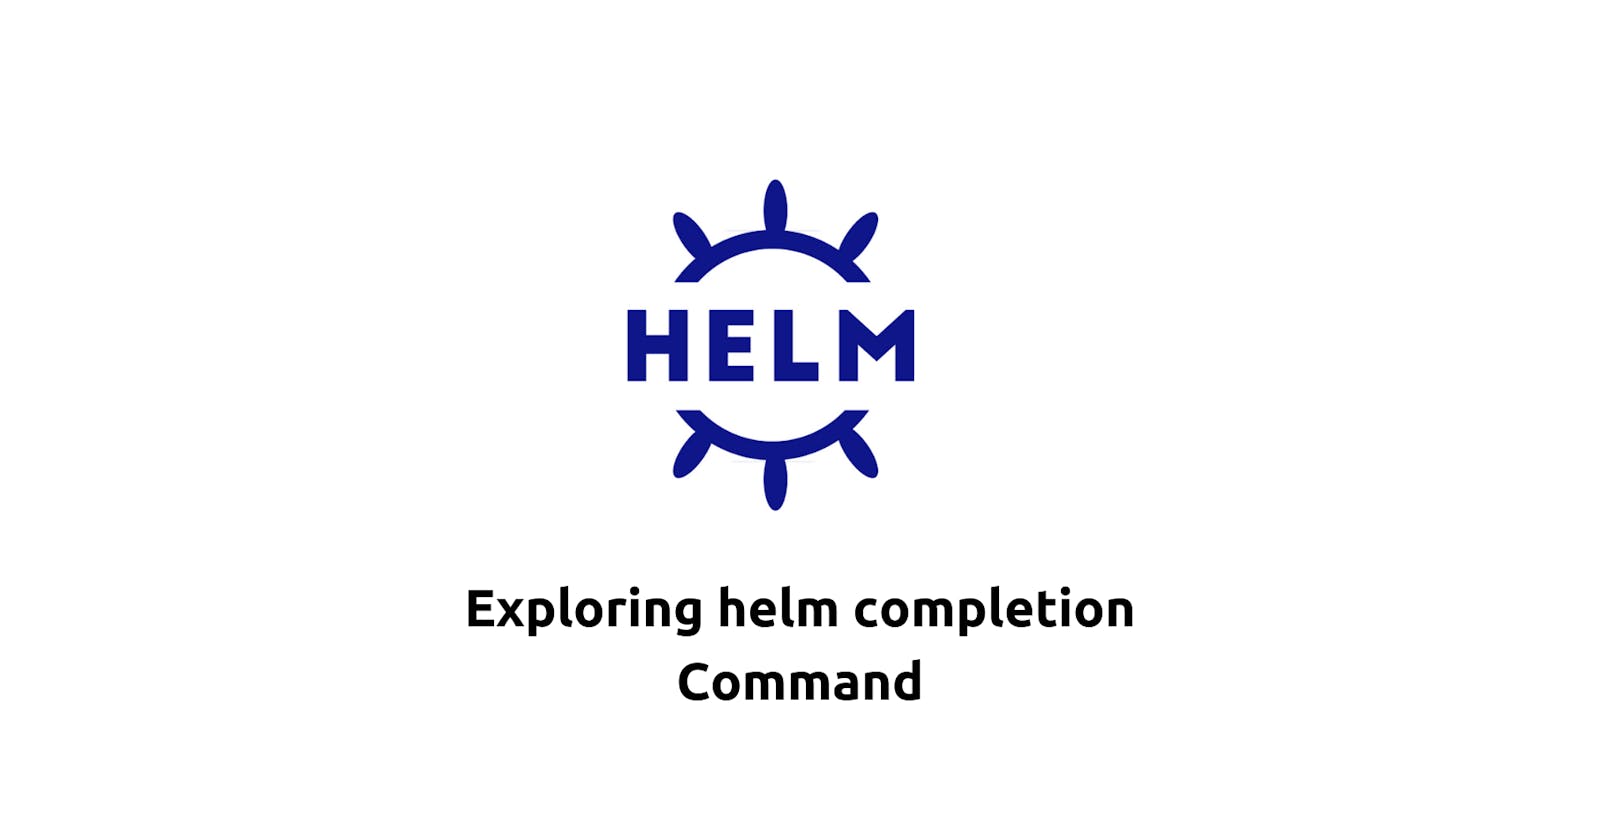 Exploring helm completion Command